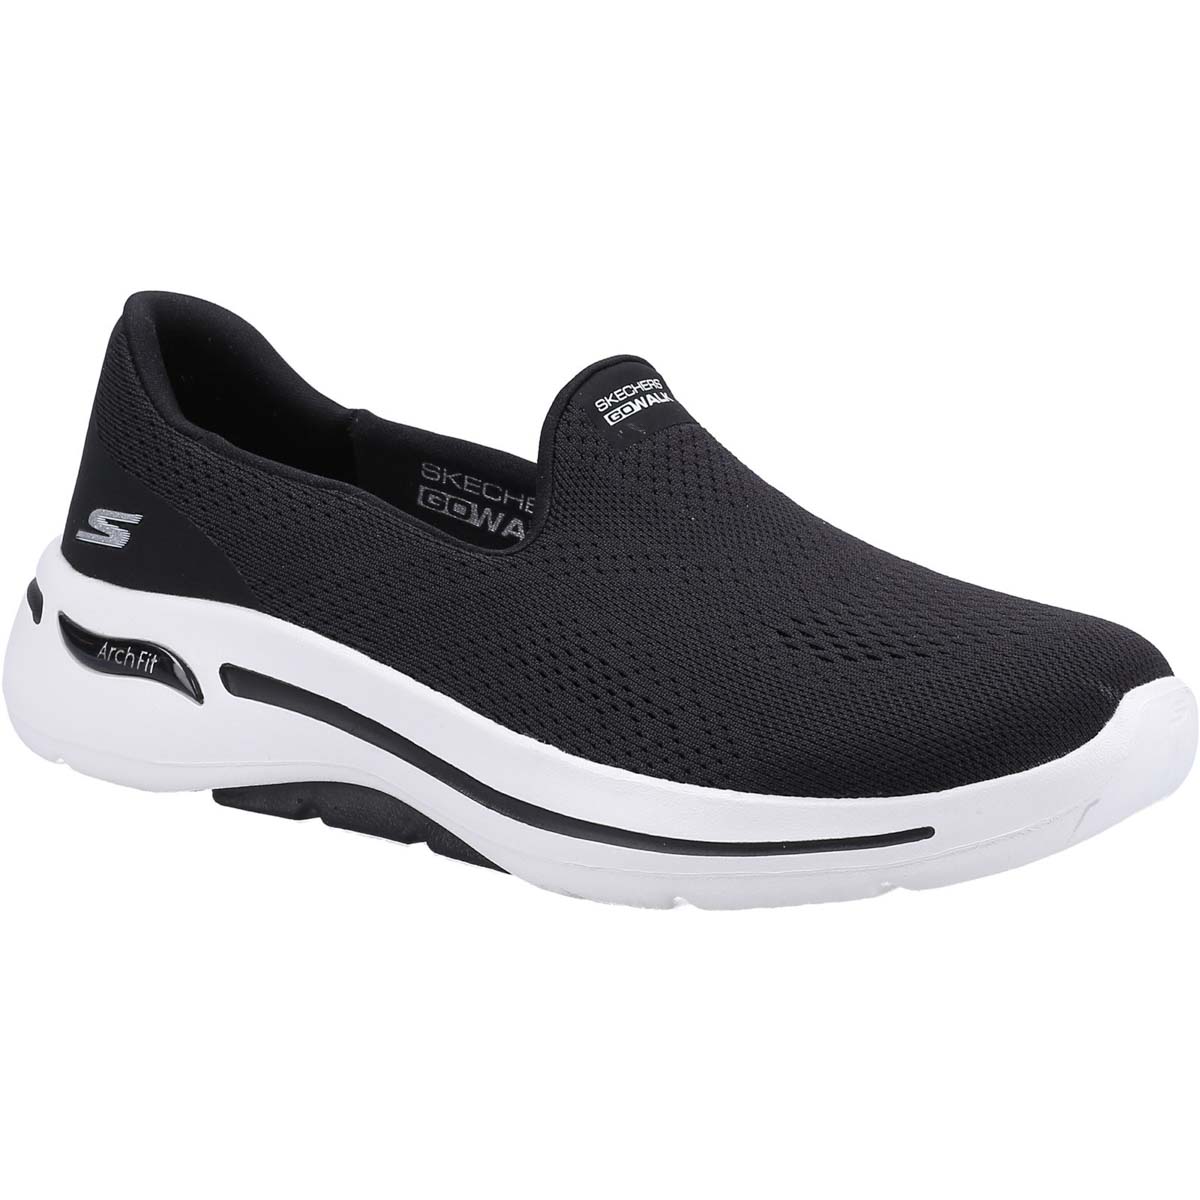 Skechers Go Walk Arch Fit Imagined Black Womens Trainers 124483 In Size 7 In Plain Black